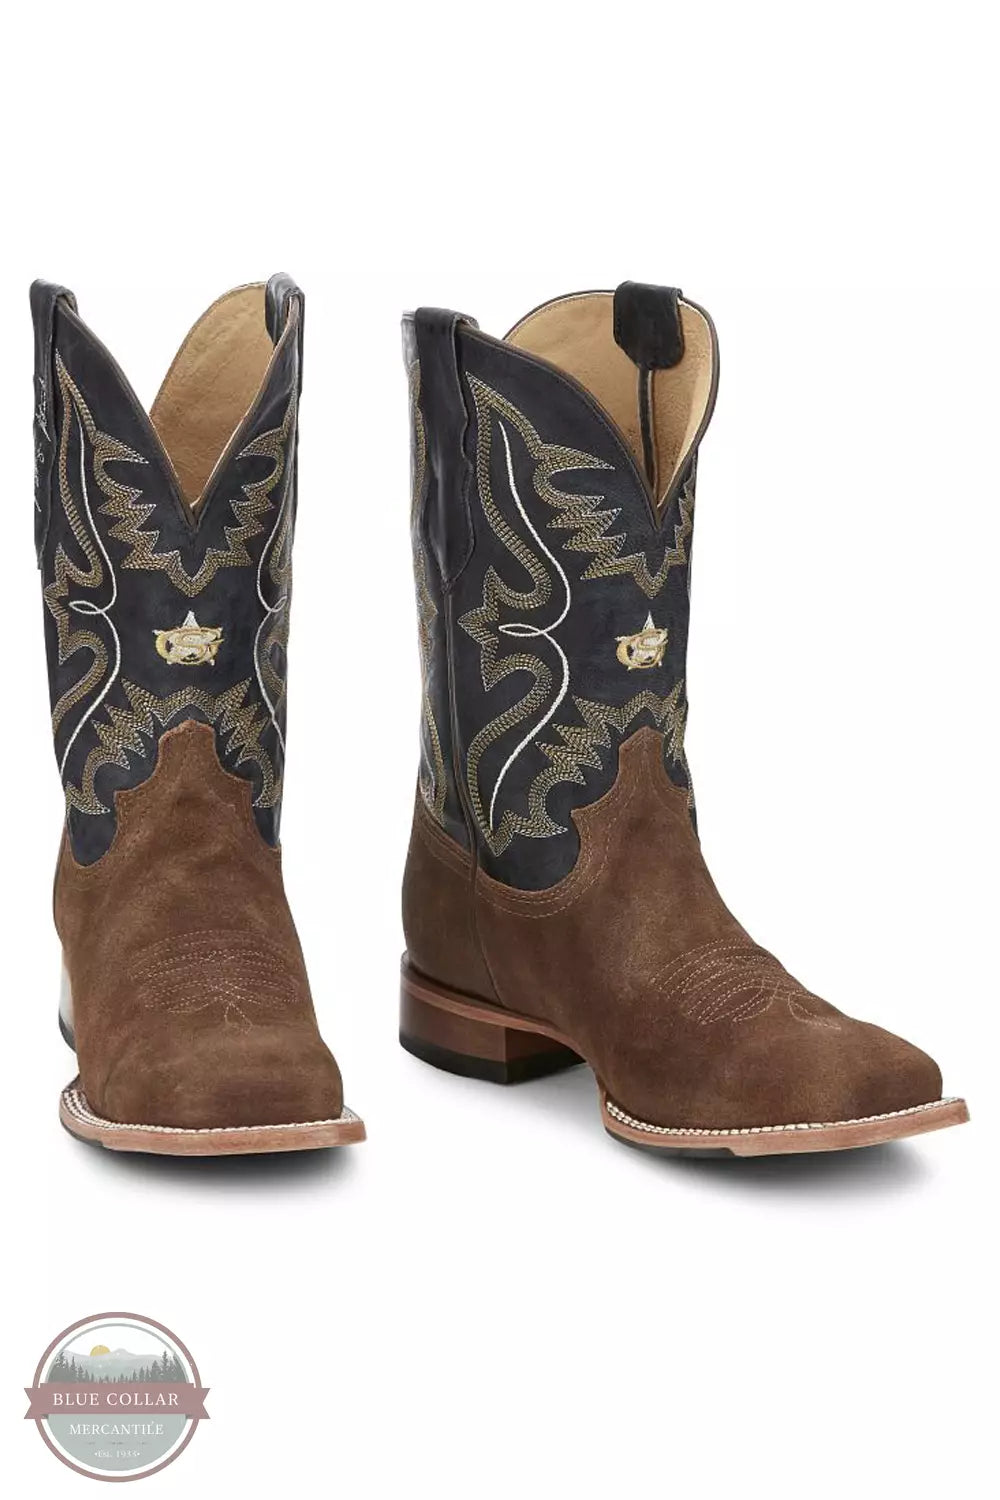 Justin GR8015 Dillon Western Boot Profile View